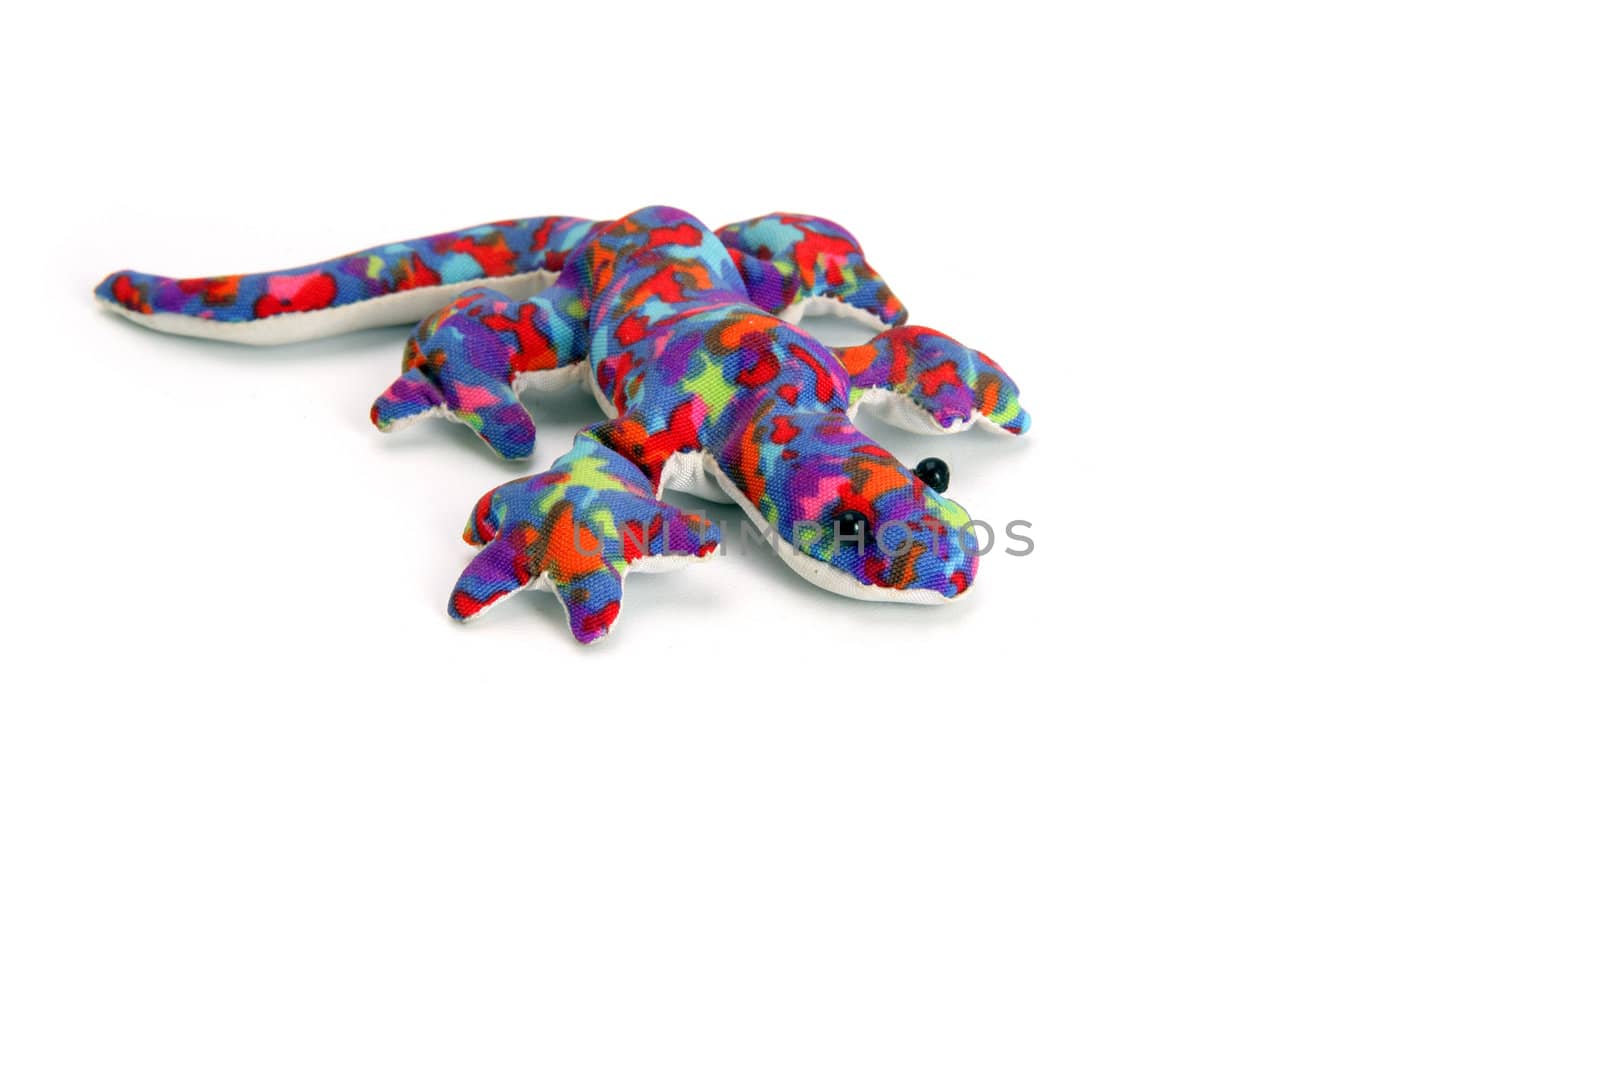 Toy lizard by phovoir